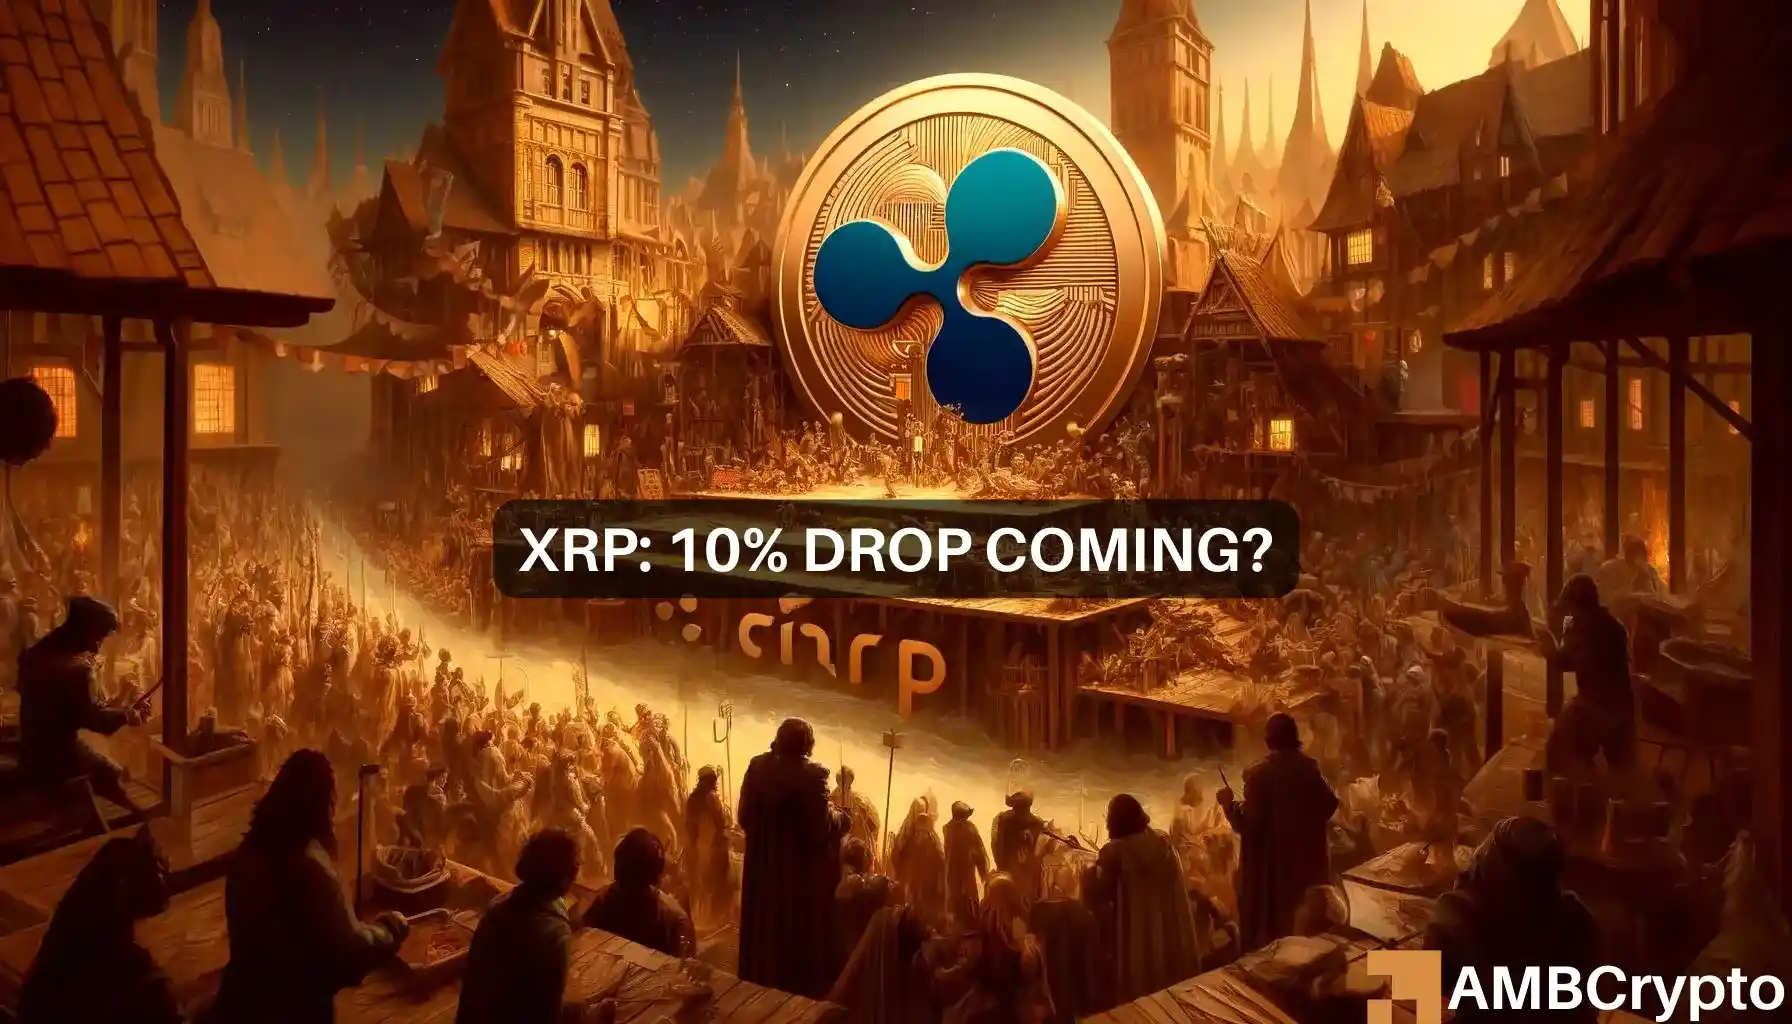 XRP price prediction: This group should wait for a 10% drop before buying